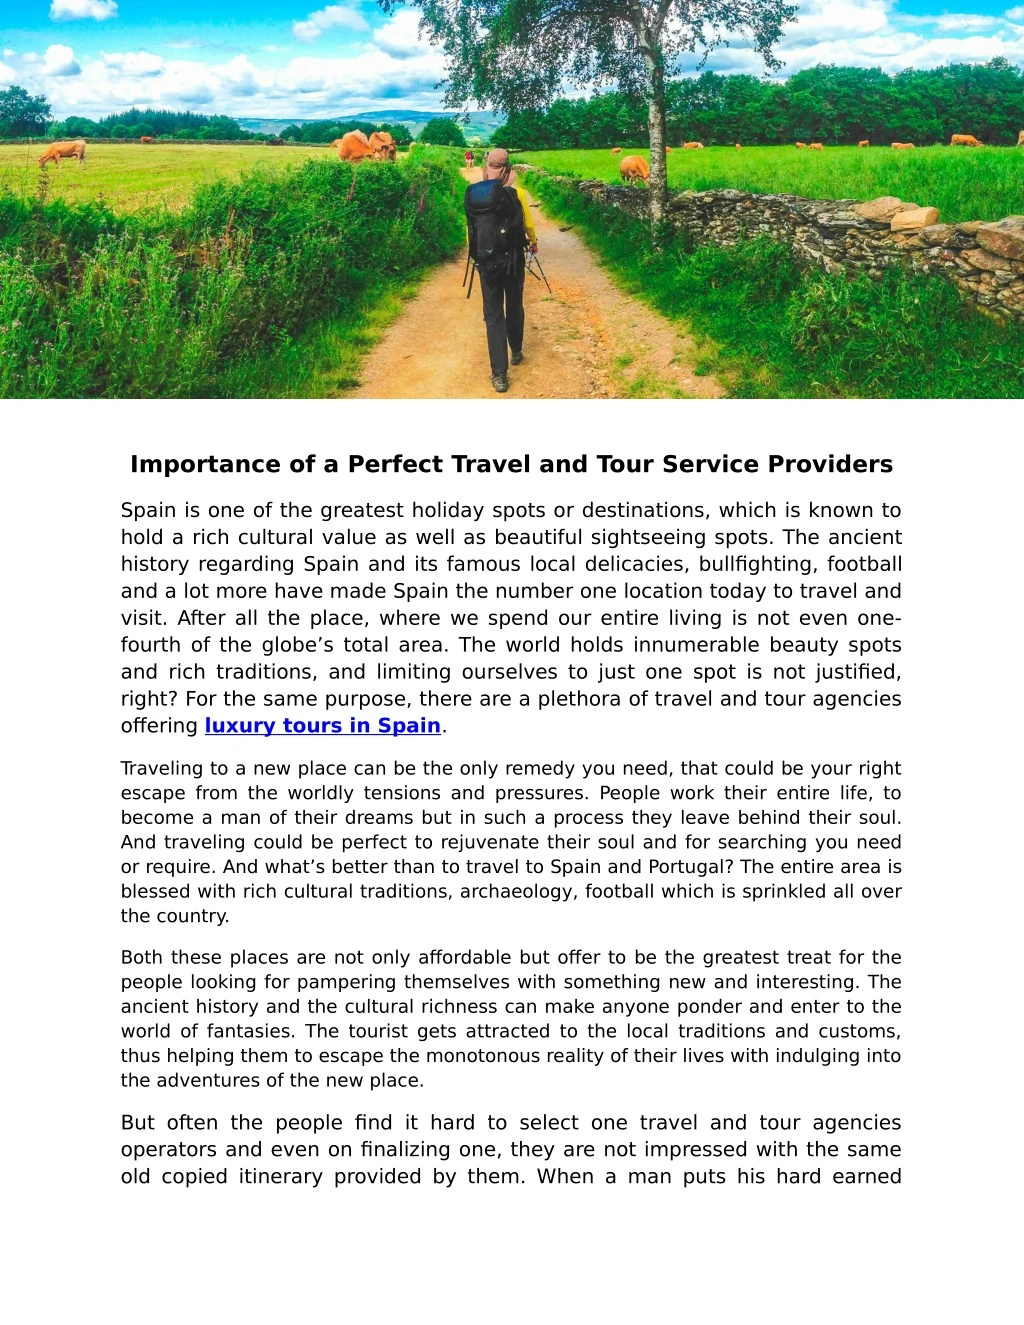 importance of a perfect travel and tour service